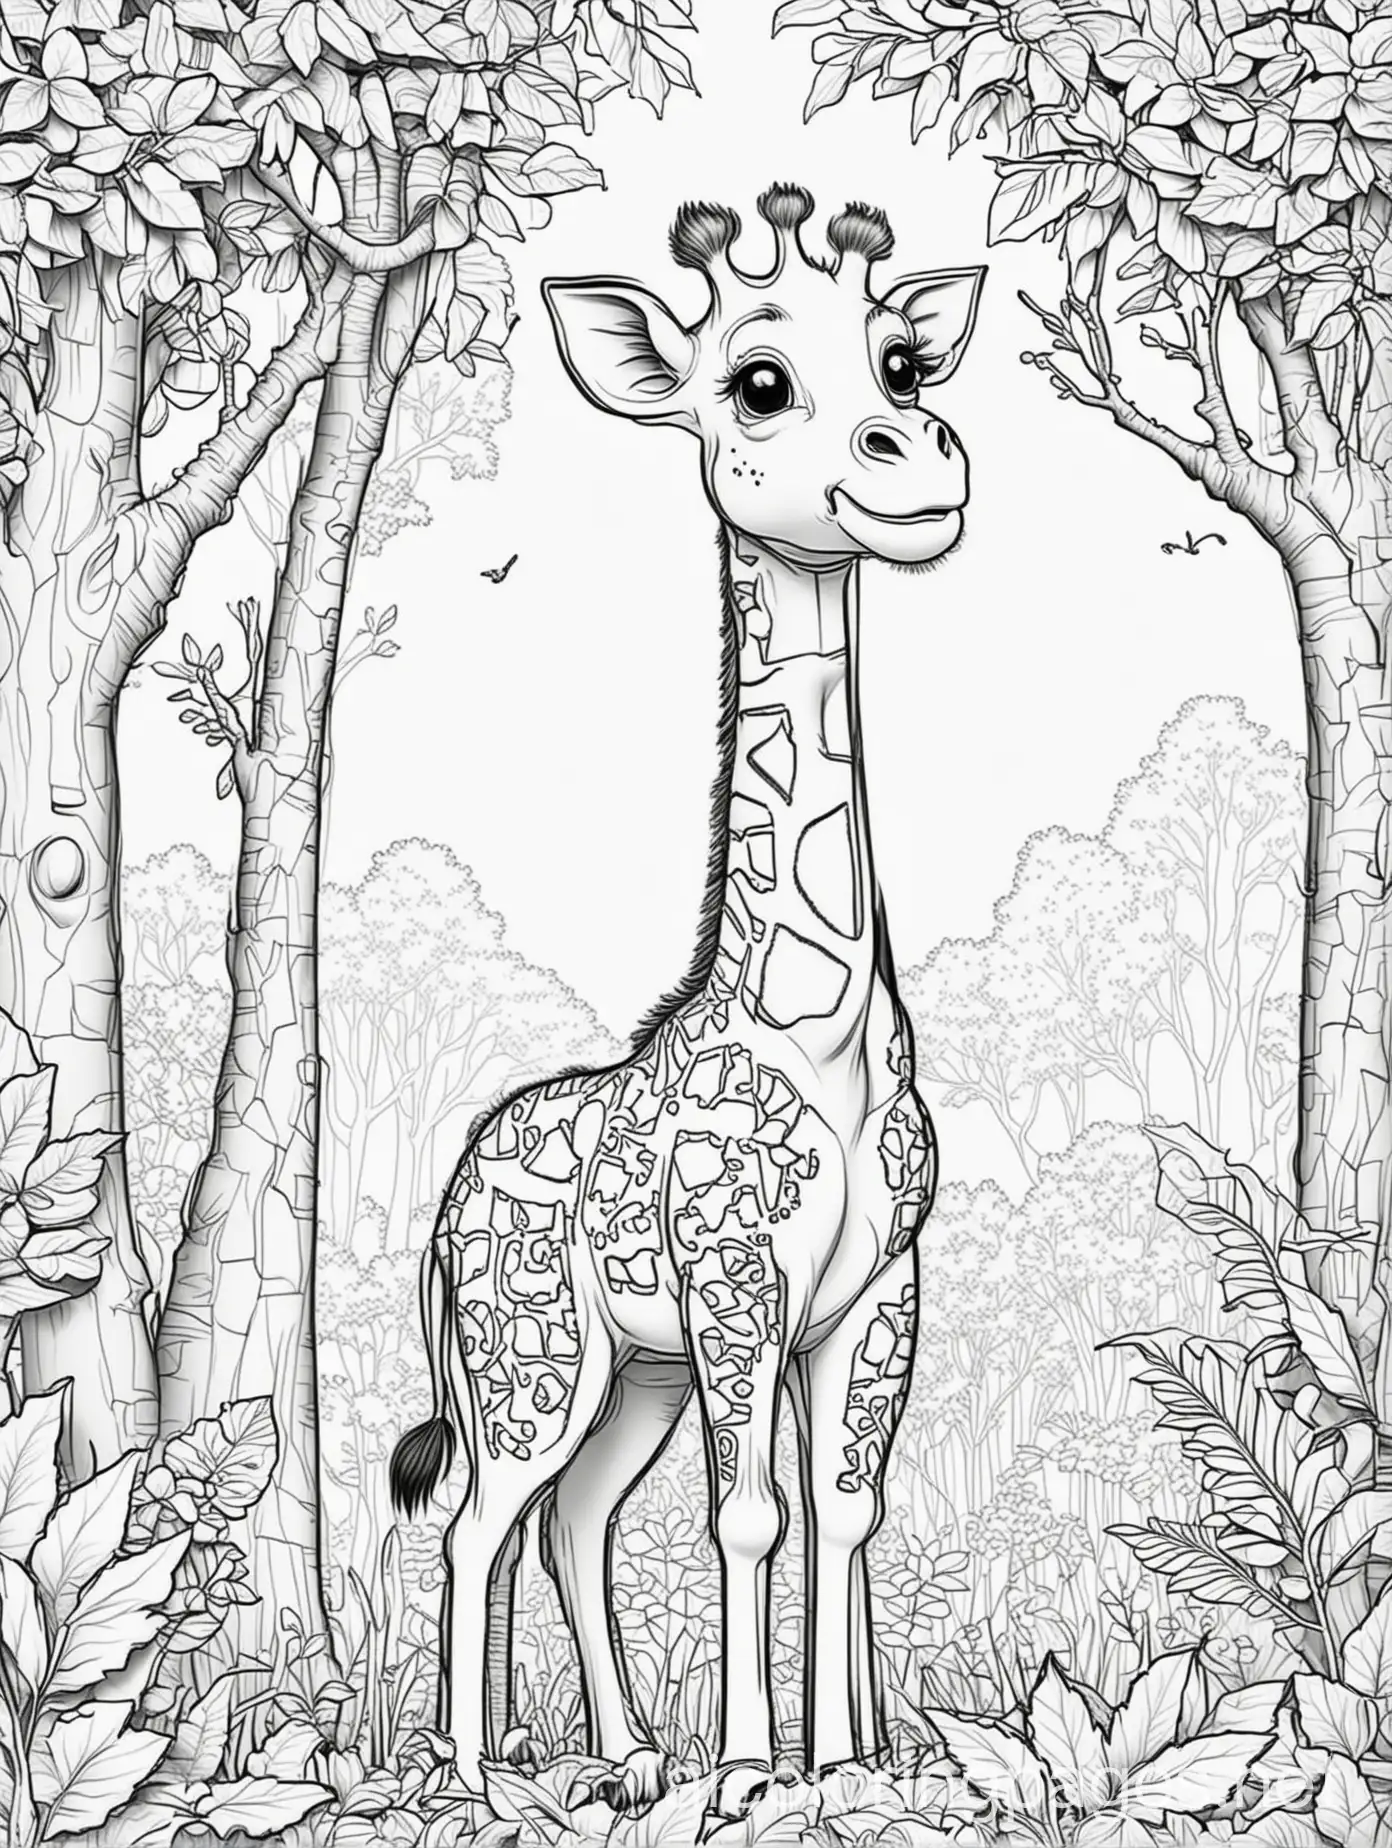 happy cartoon giraffe playing in the forest, Coloring Page, black and white, line art, white background, Simplicity, Ample White Space. The background of the coloring page is plain white to make it easy for young children to color within the lines. The outlines of all the subjects are easy to distinguish, making it simple for kids to color without too much difficulty, Coloring Page, black and white, line art, white background, Simplicity, Ample White Space. The background of the coloring page is plain white to make it easy for young children to color within the lines. The outlines of all the subjects are easy to distinguish, making it simple for kids to color without too much difficulty